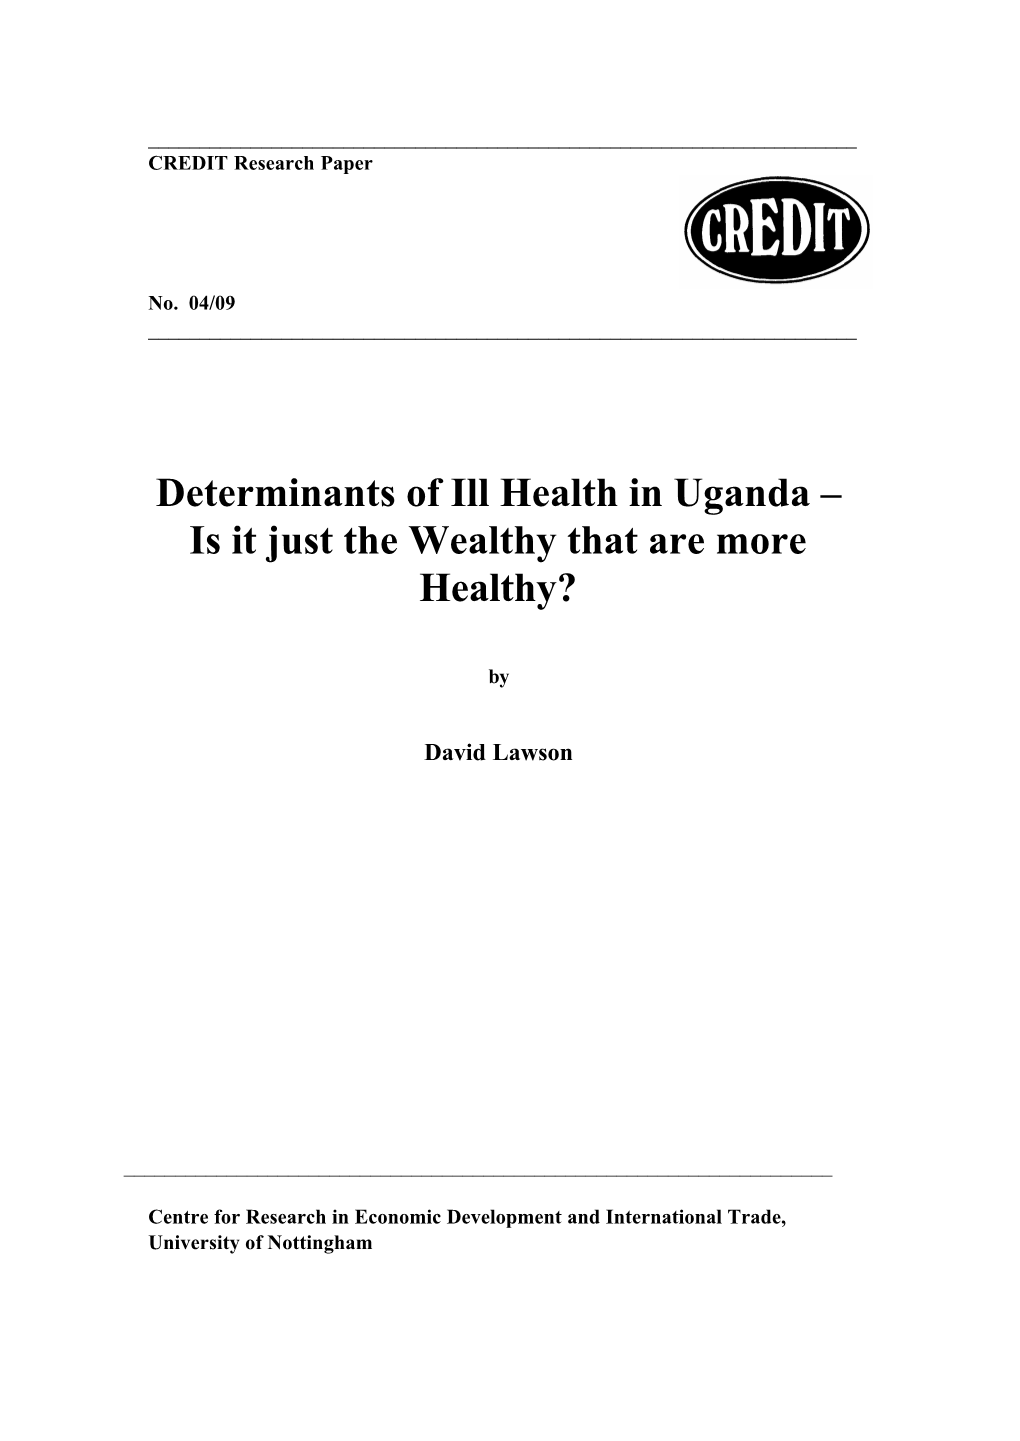 Determinants of Ill Health in Uganda – Is It Just the Wealthy That Are More Healthy?